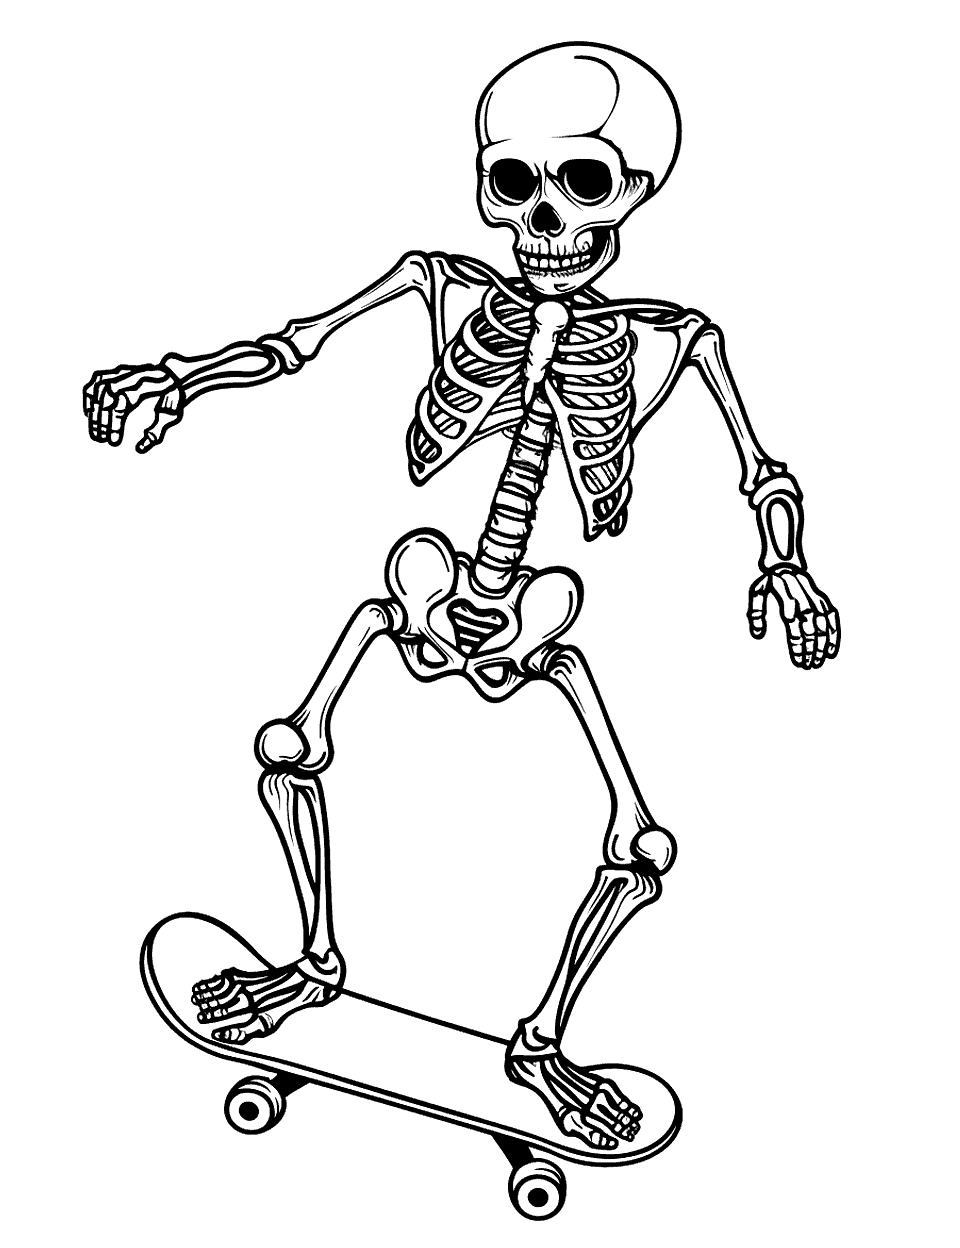 Cool Skateboarding Skeleton Coloring Page - A skeleton performing a trick on a skateboard.